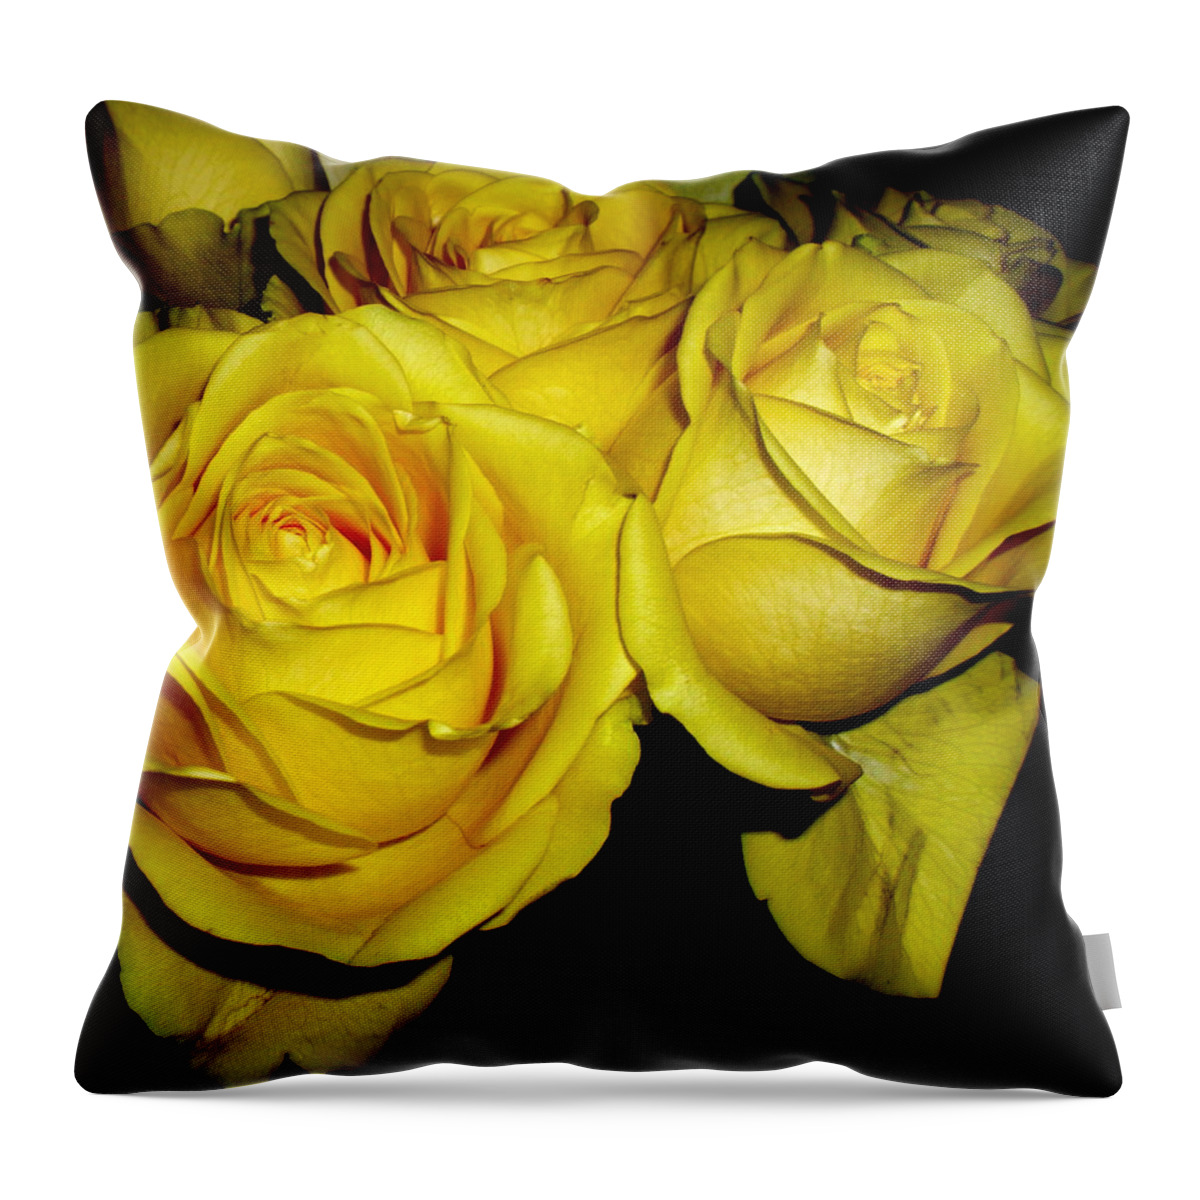 Floral Throw Pillow featuring the photograph Yellow Roses by Fred Wilson